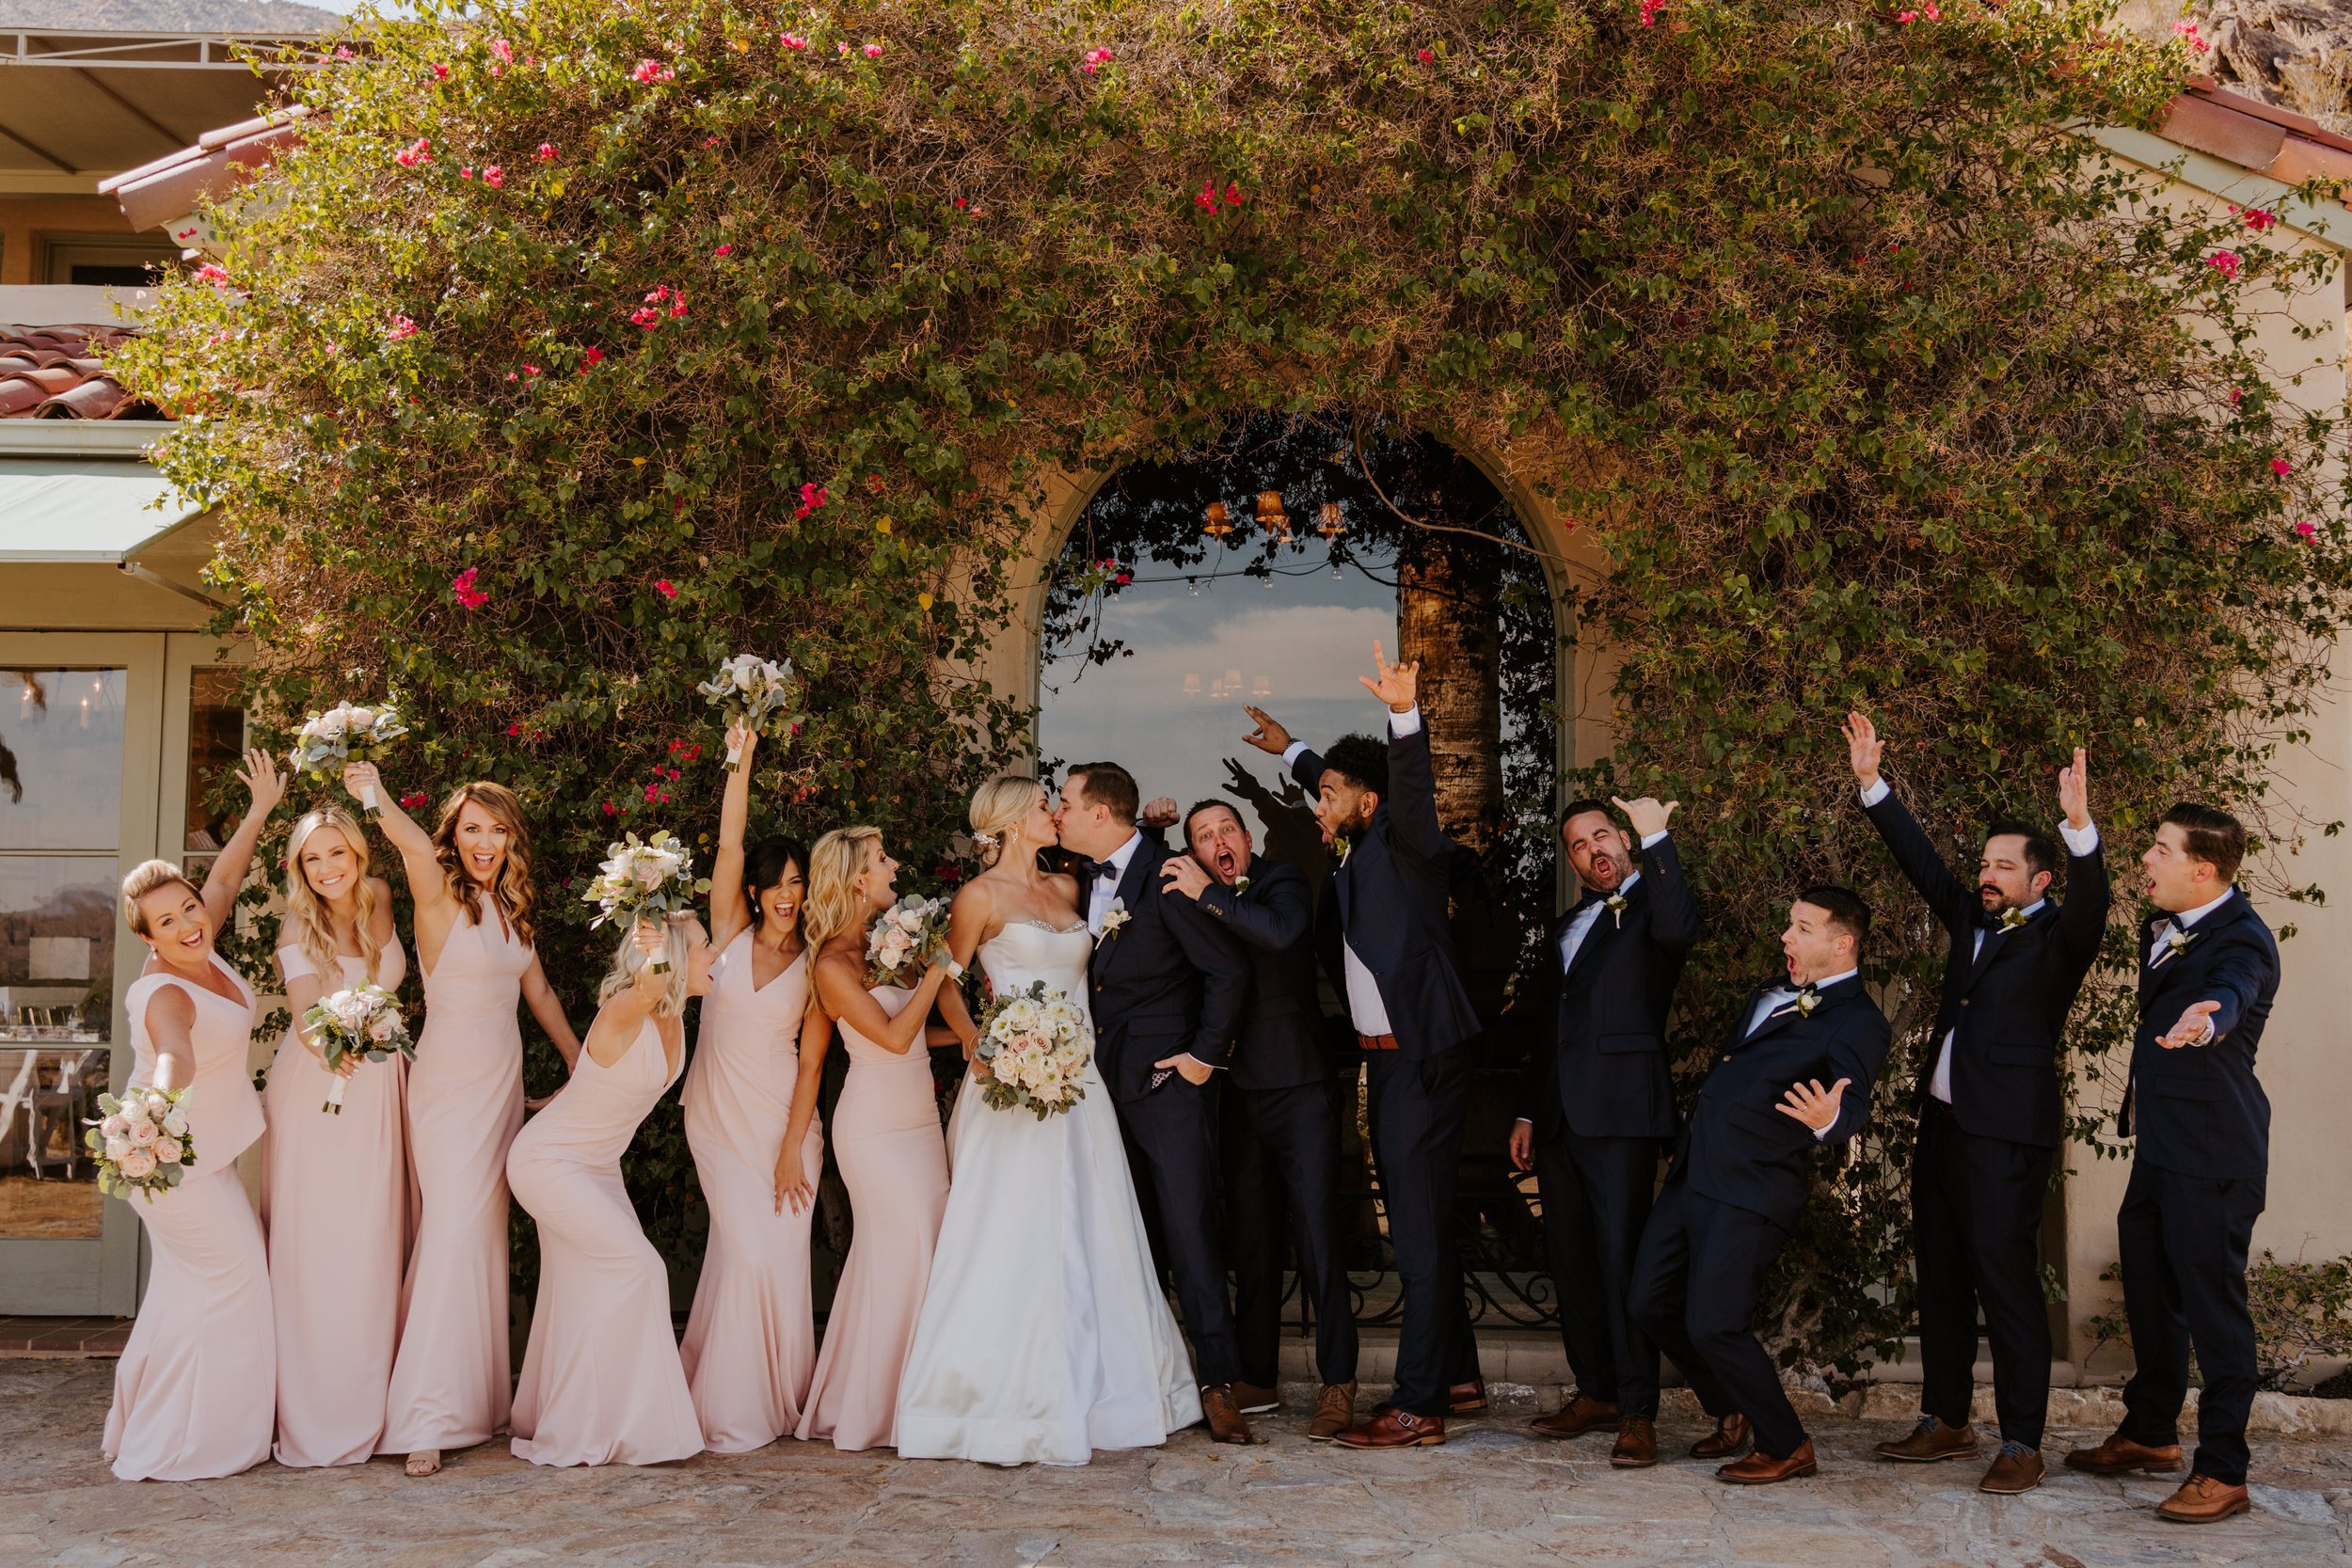 Wedding party photo at The O’Donnell House Palm Springs, photography by Tida Svy